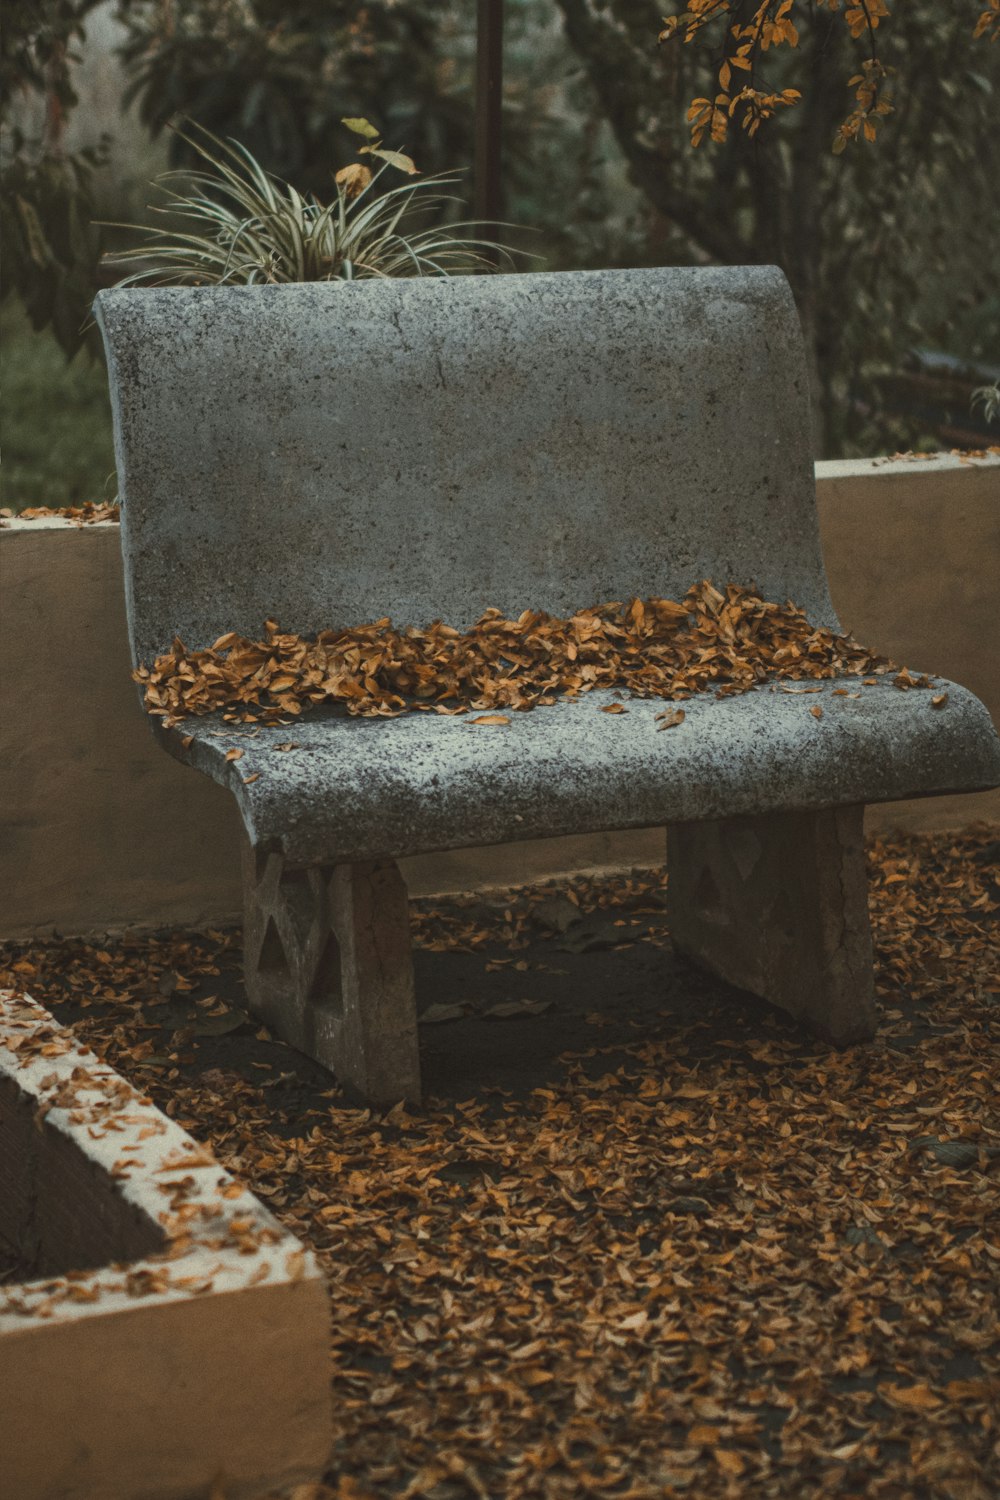 gray concrete bench filled with brown leaves